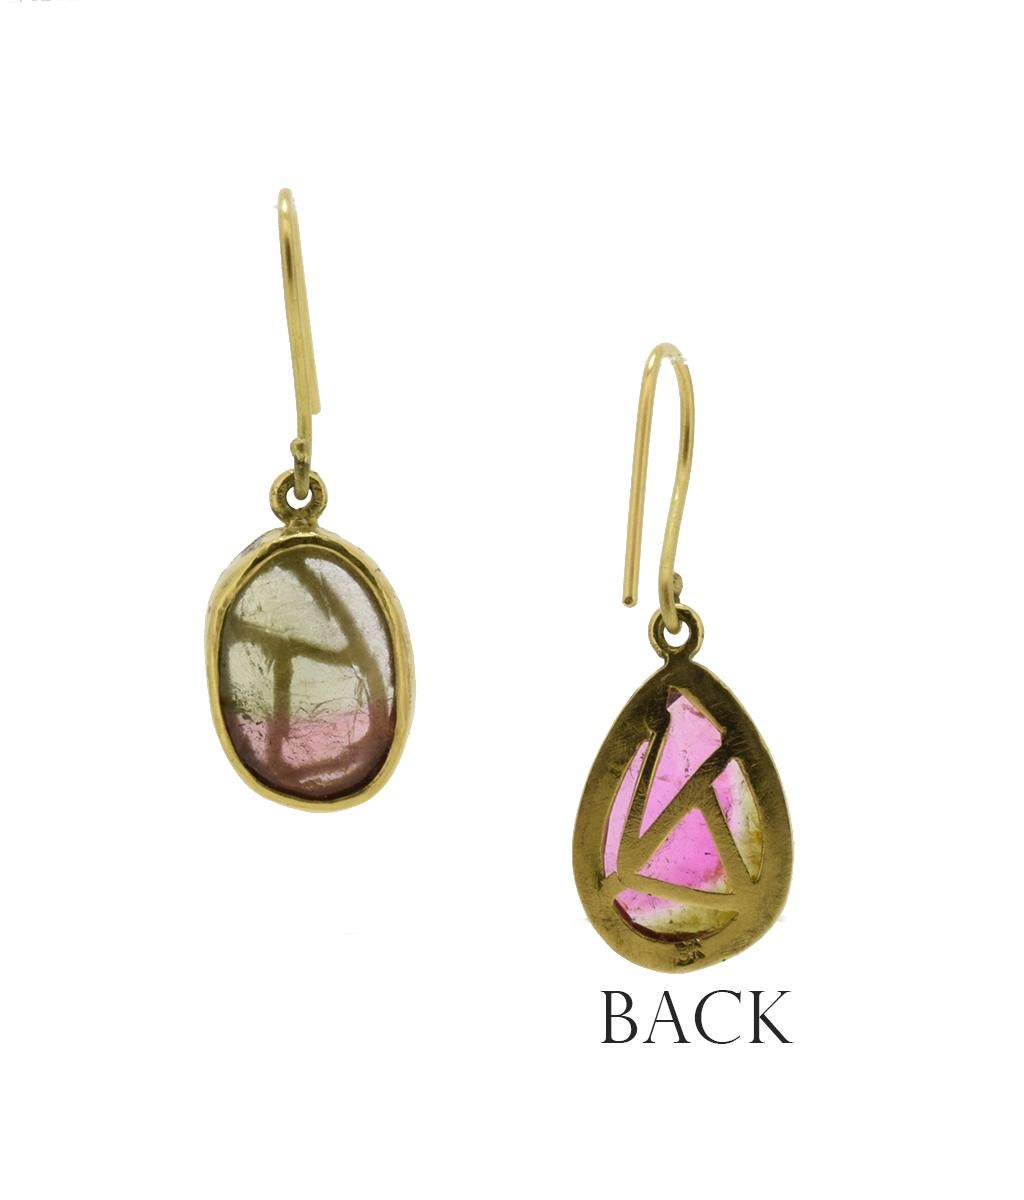 Watermelon Tourmaline in a Stained Glass style with 18K gold.  I've put a back on these to make them look like little pieces of stain glass.  It also serves as my logo, LK. One is an oval and the other a teardrop -- a simple asymmetric pair.

These